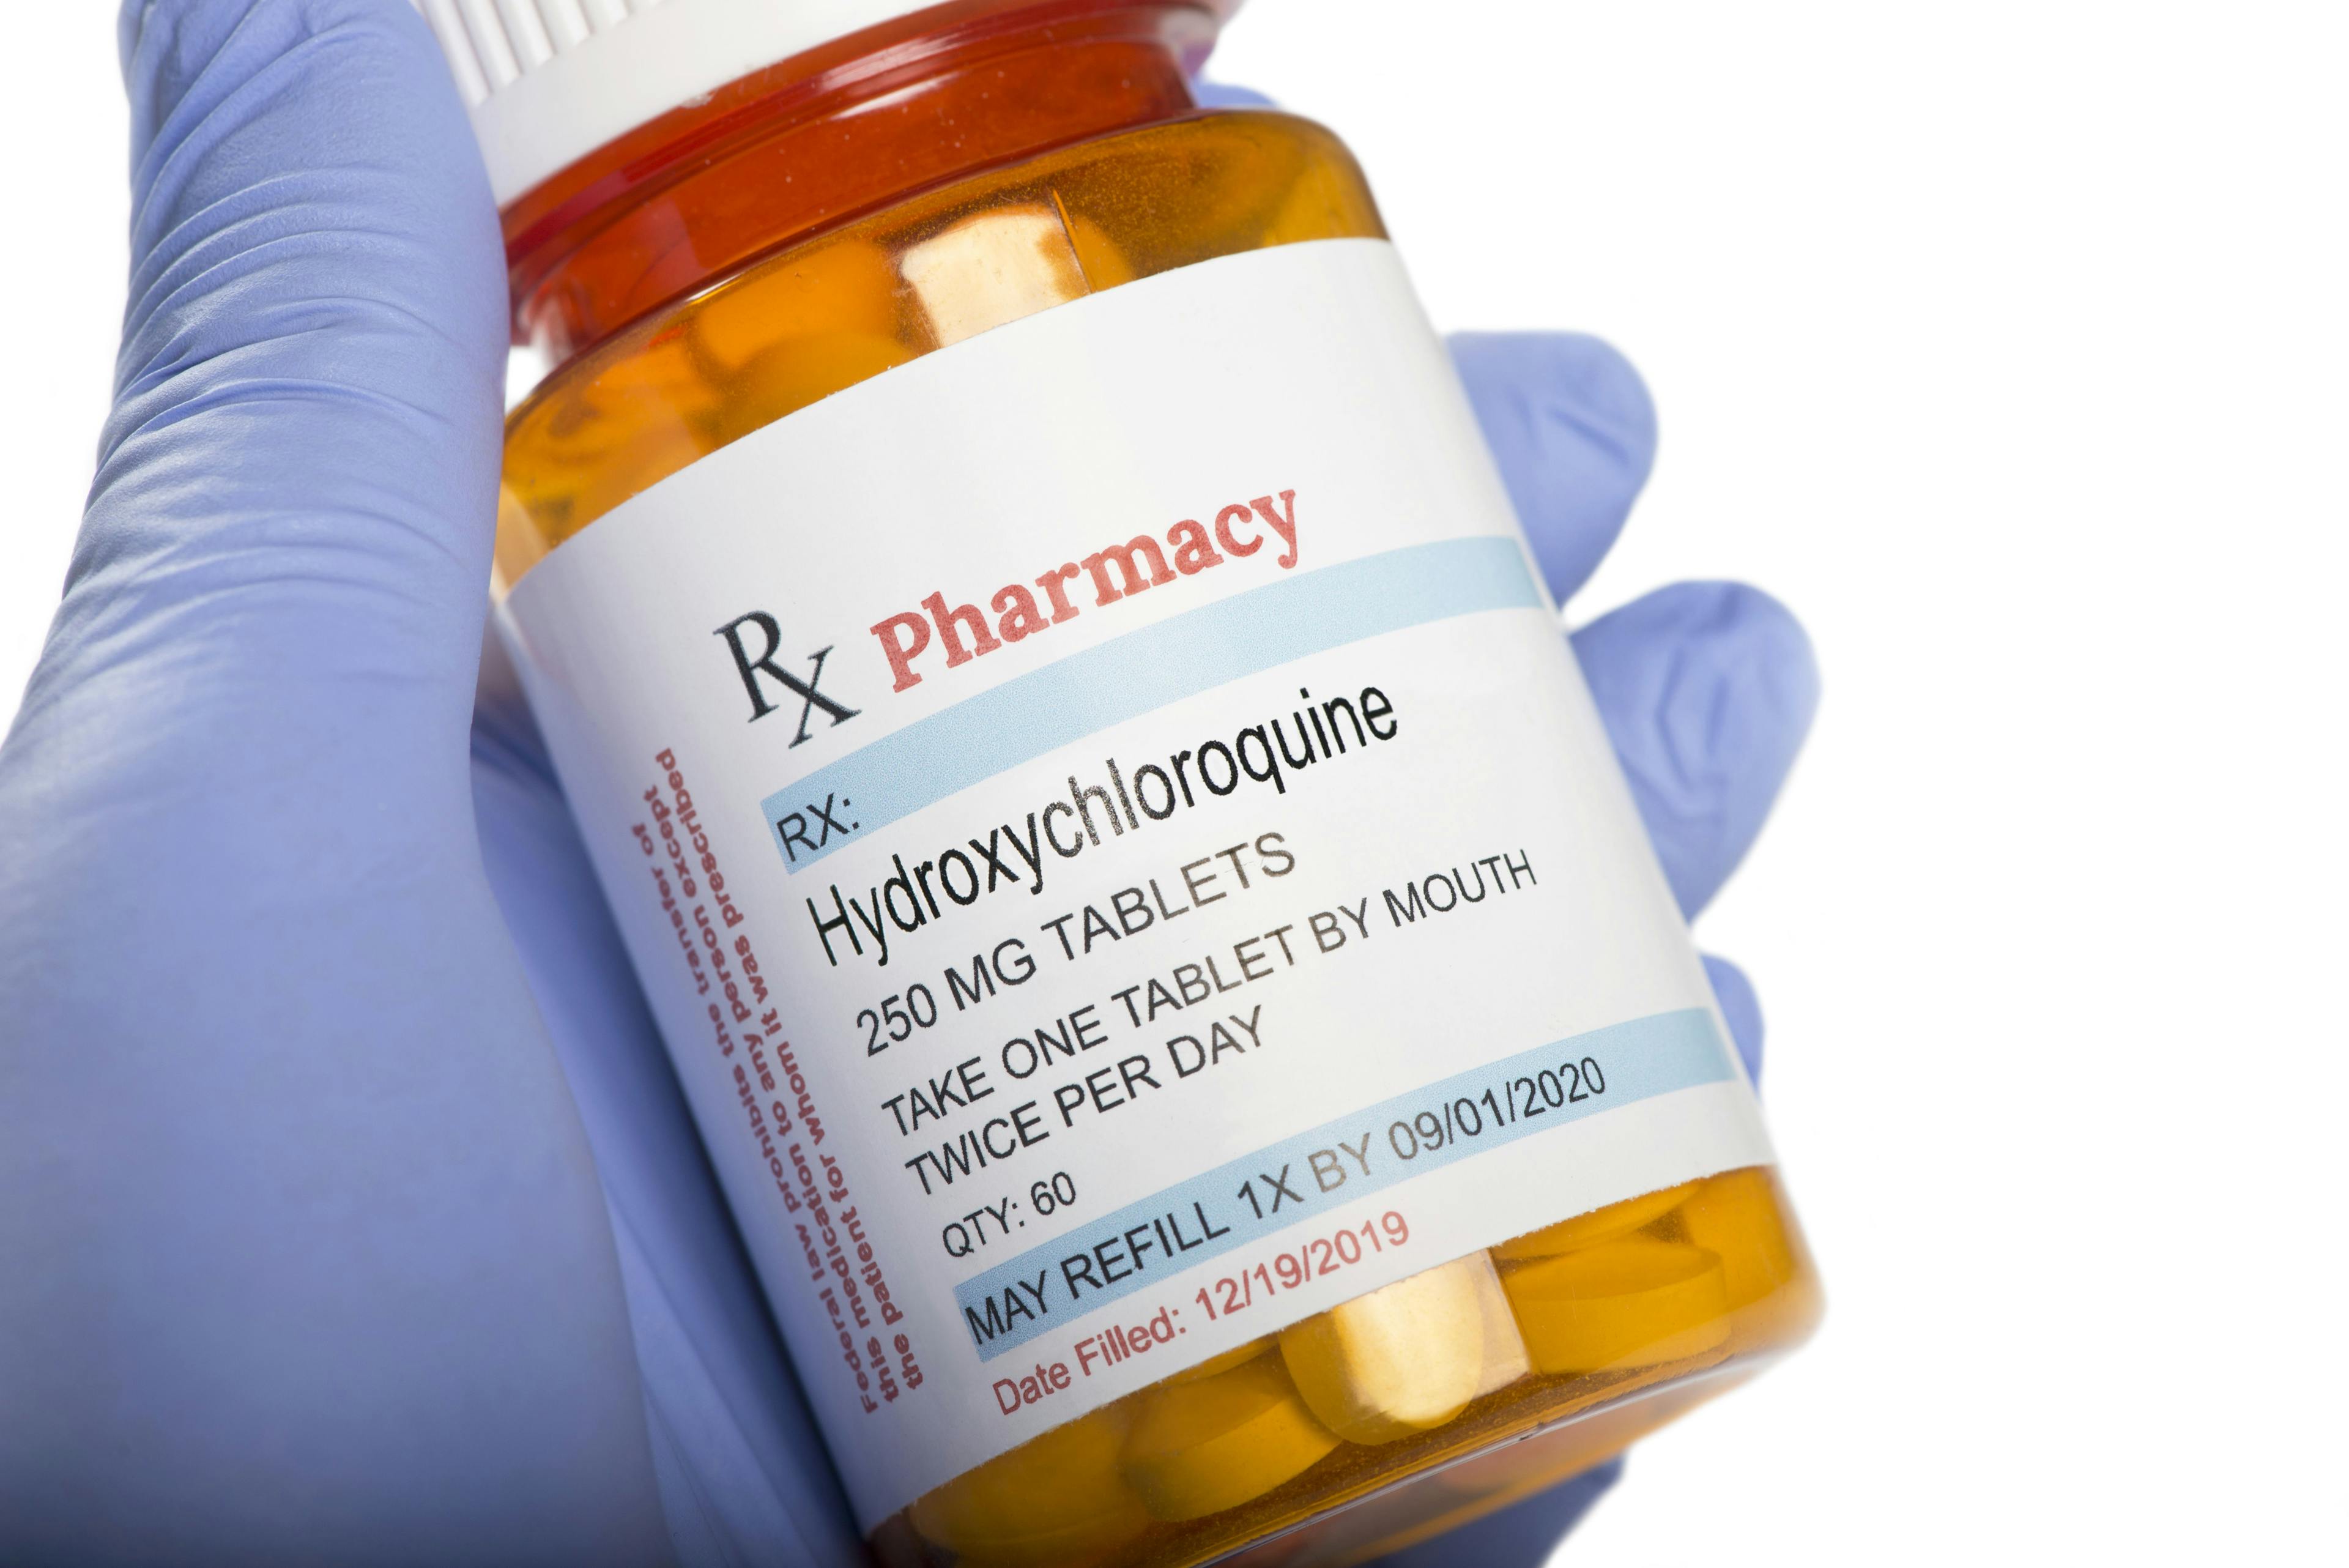  Time to Revise Hydroxychloroquine, Retinopathy Guidelines, Say Authors